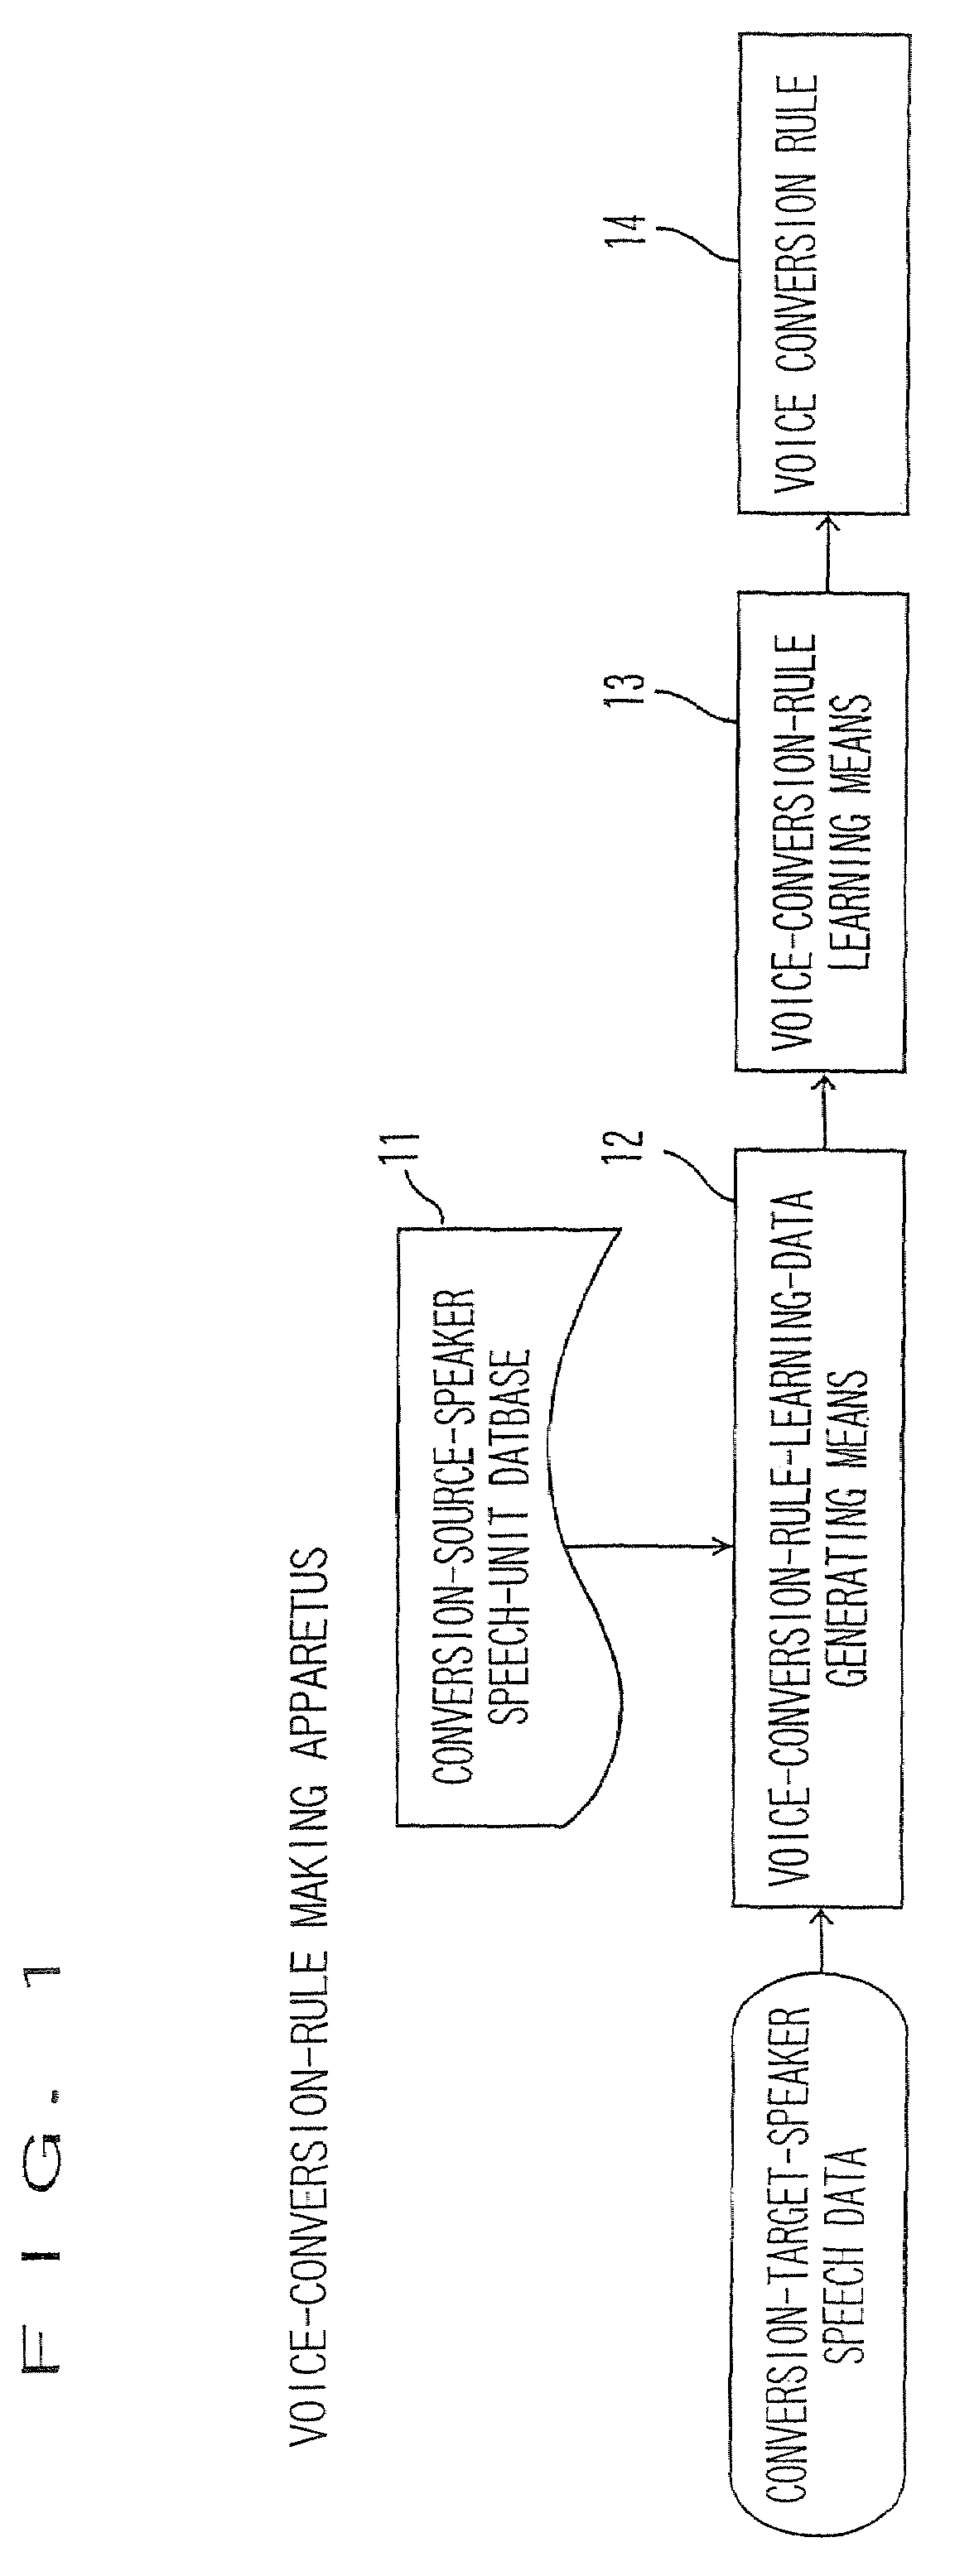 Apparatus and method for voice conversion using attribute information